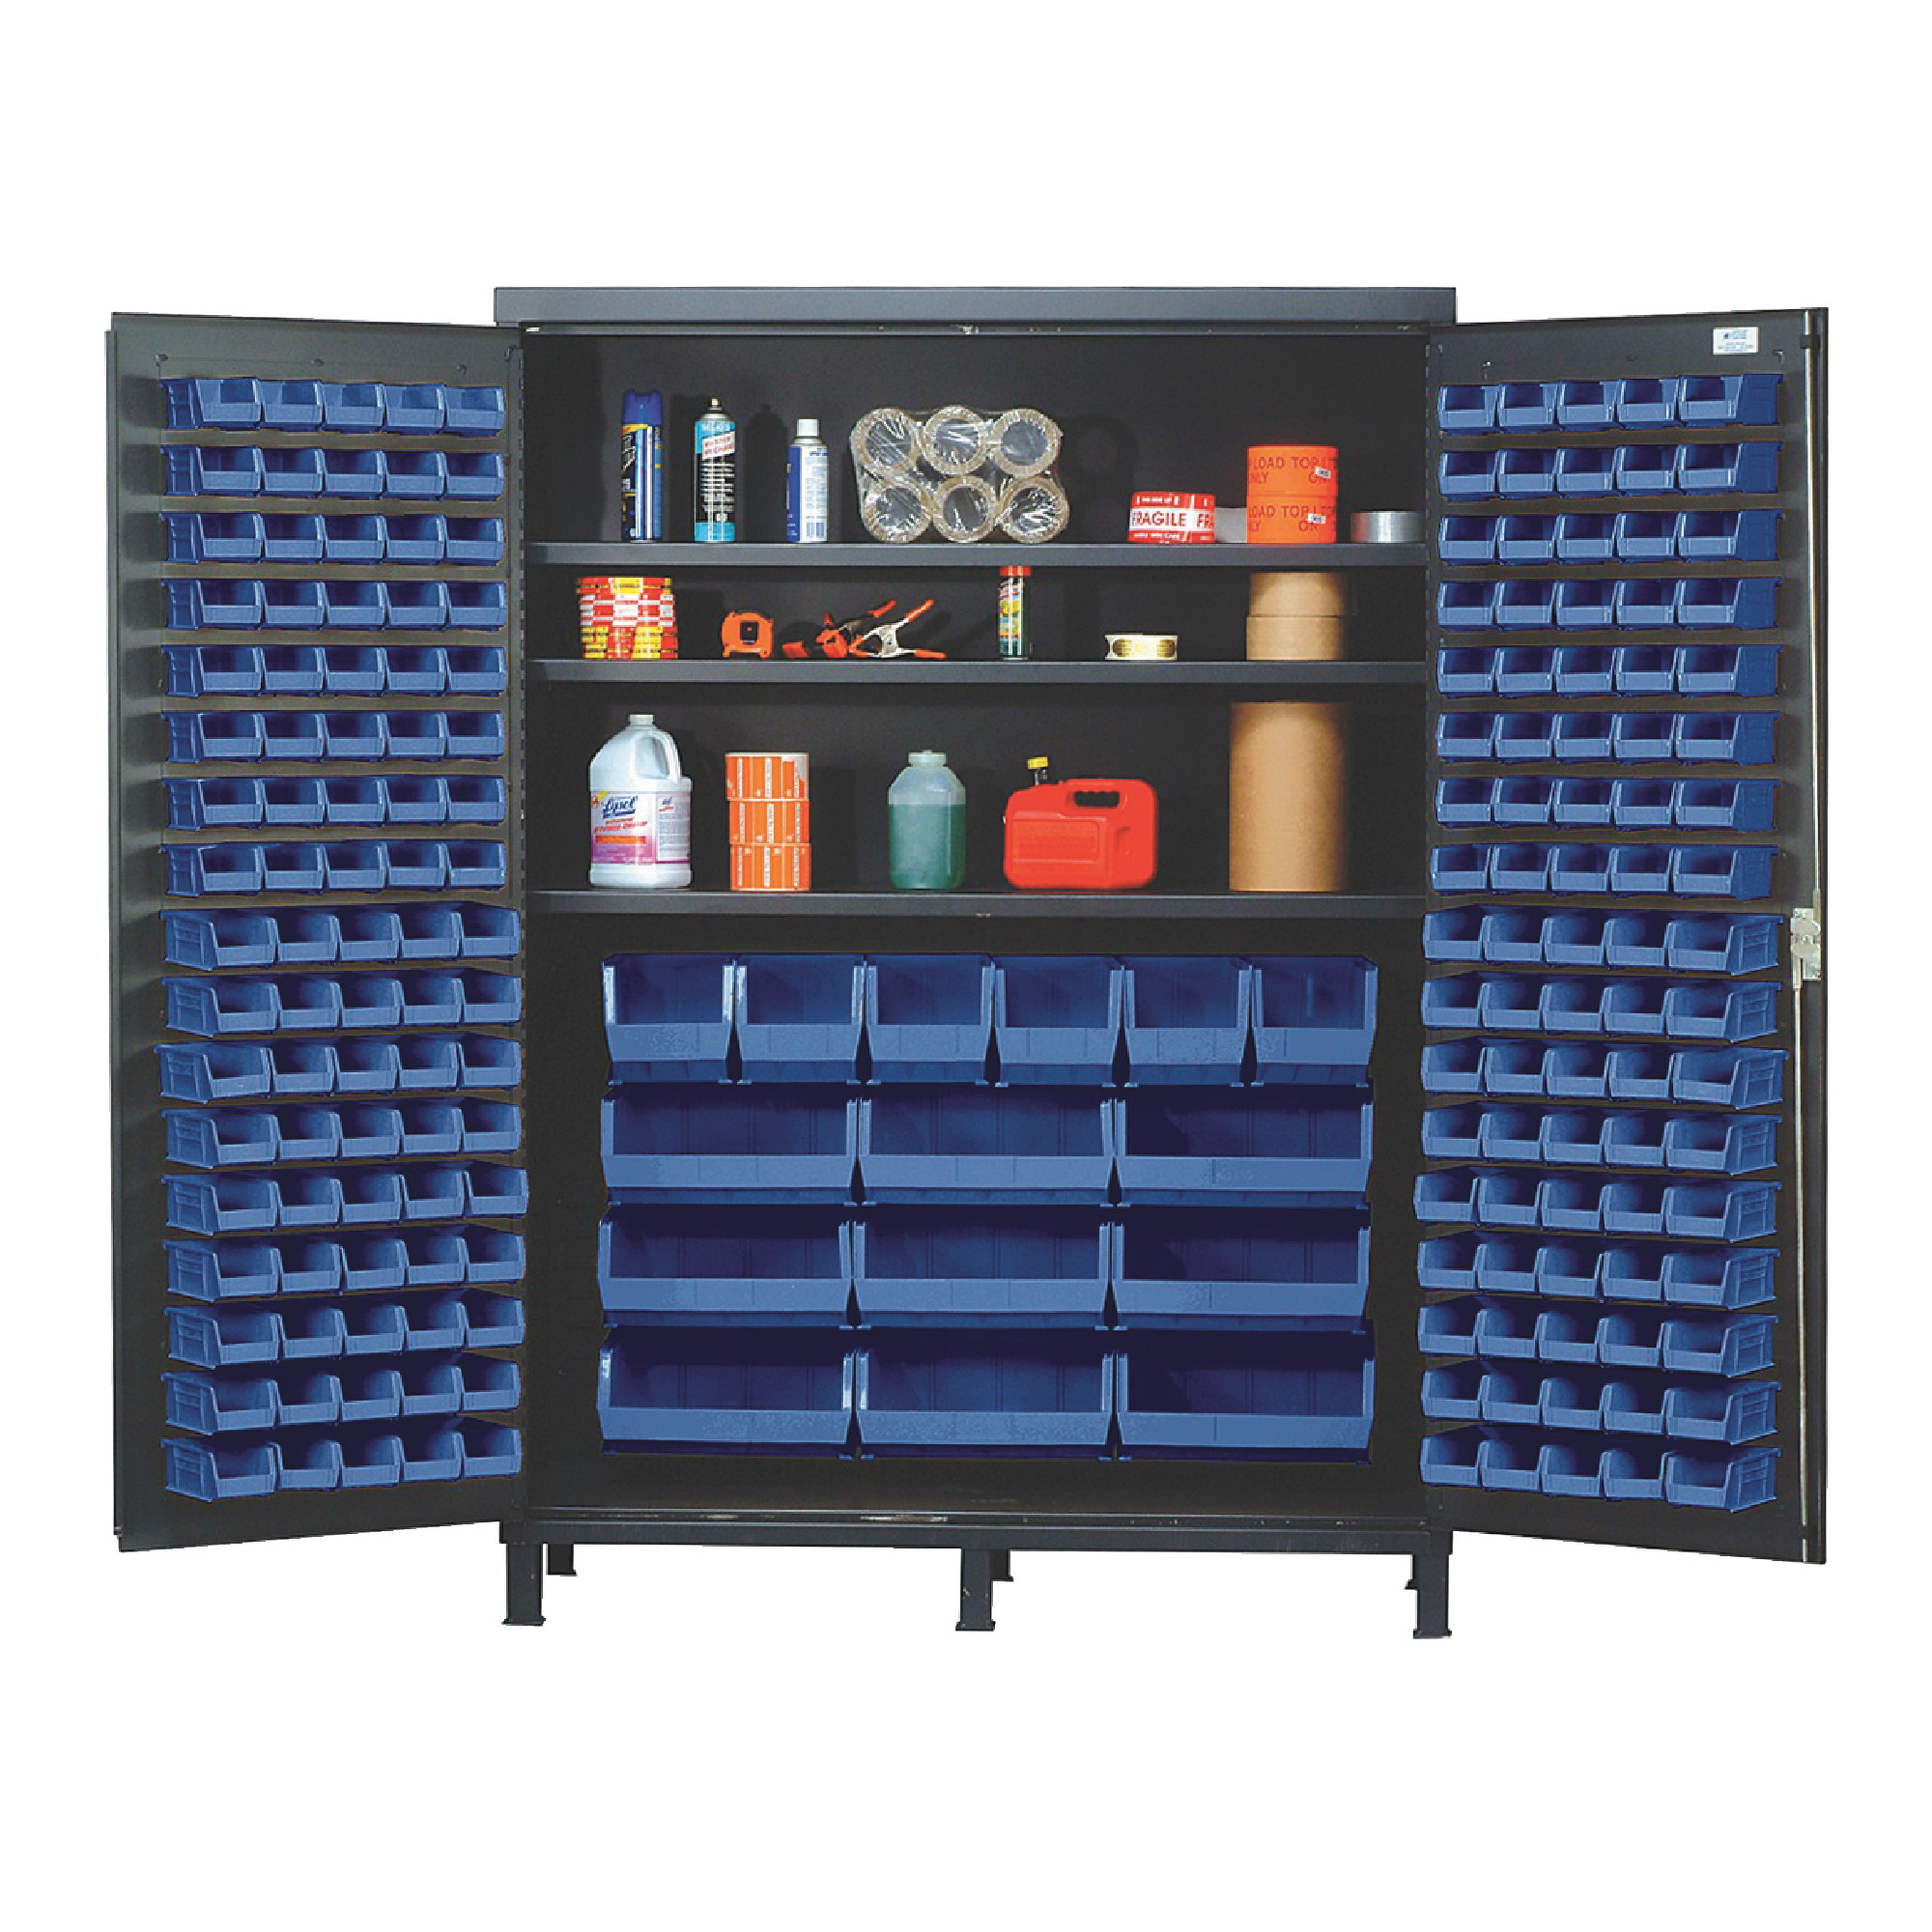 QUANTUM STORAGE SYSTEMS 60" Super Wide Colossal Heavy-Duty Floor Cabinet With 185 Blue Bins